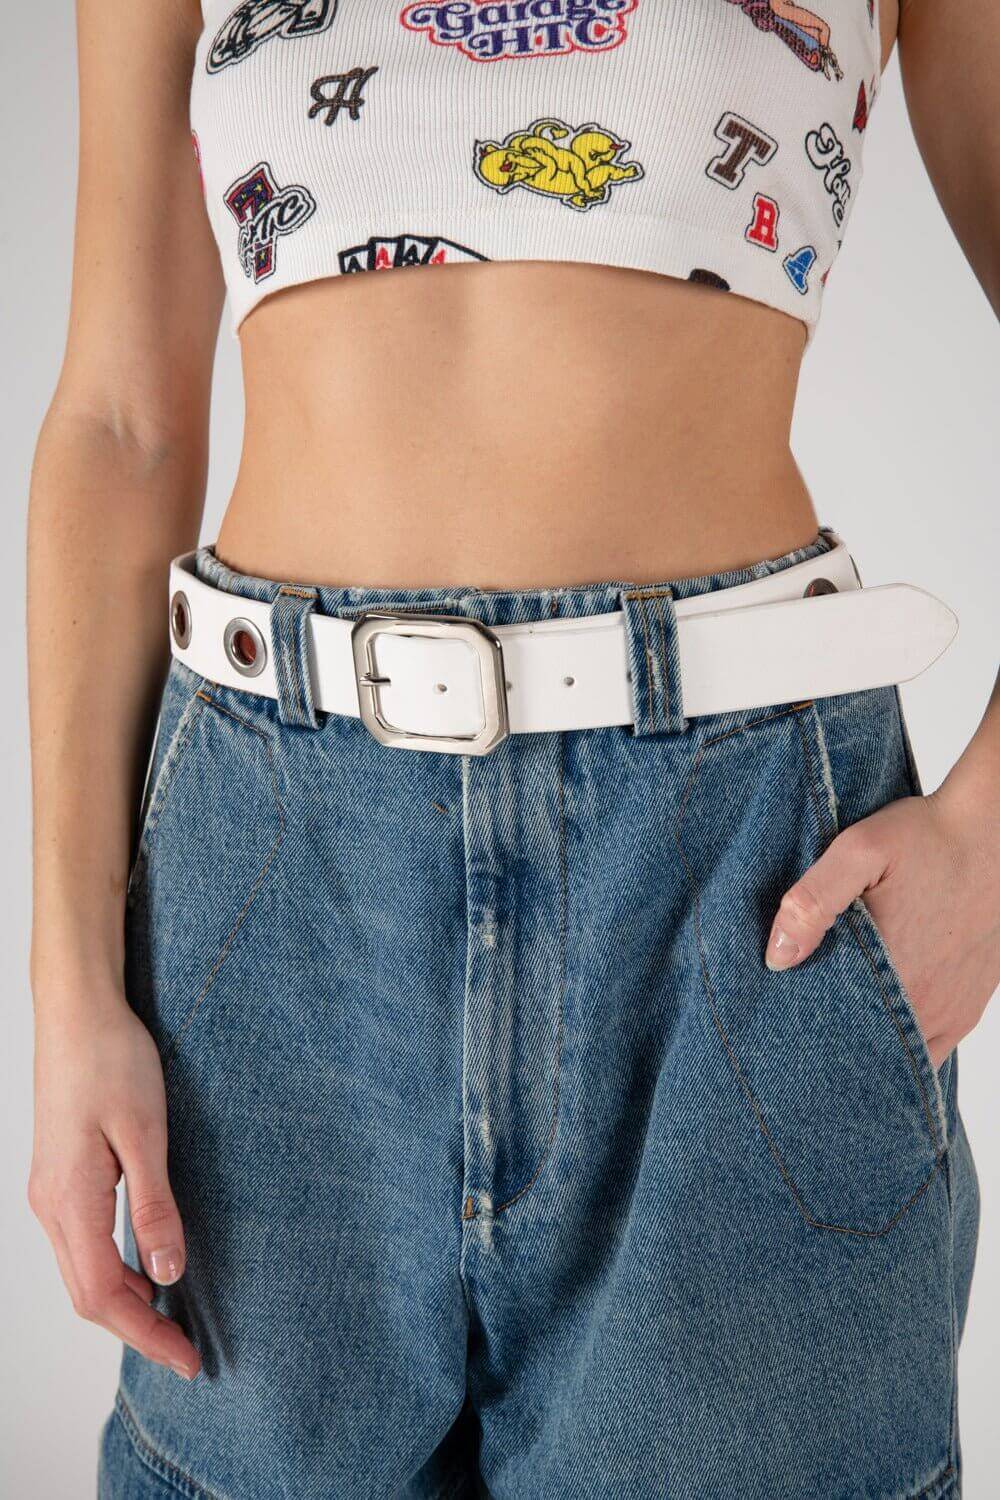 EYELET BELT White leather belt with red eyelets. Squared buckle. Height: 4 cm. Made in Italy. HTC LOS ANGELES